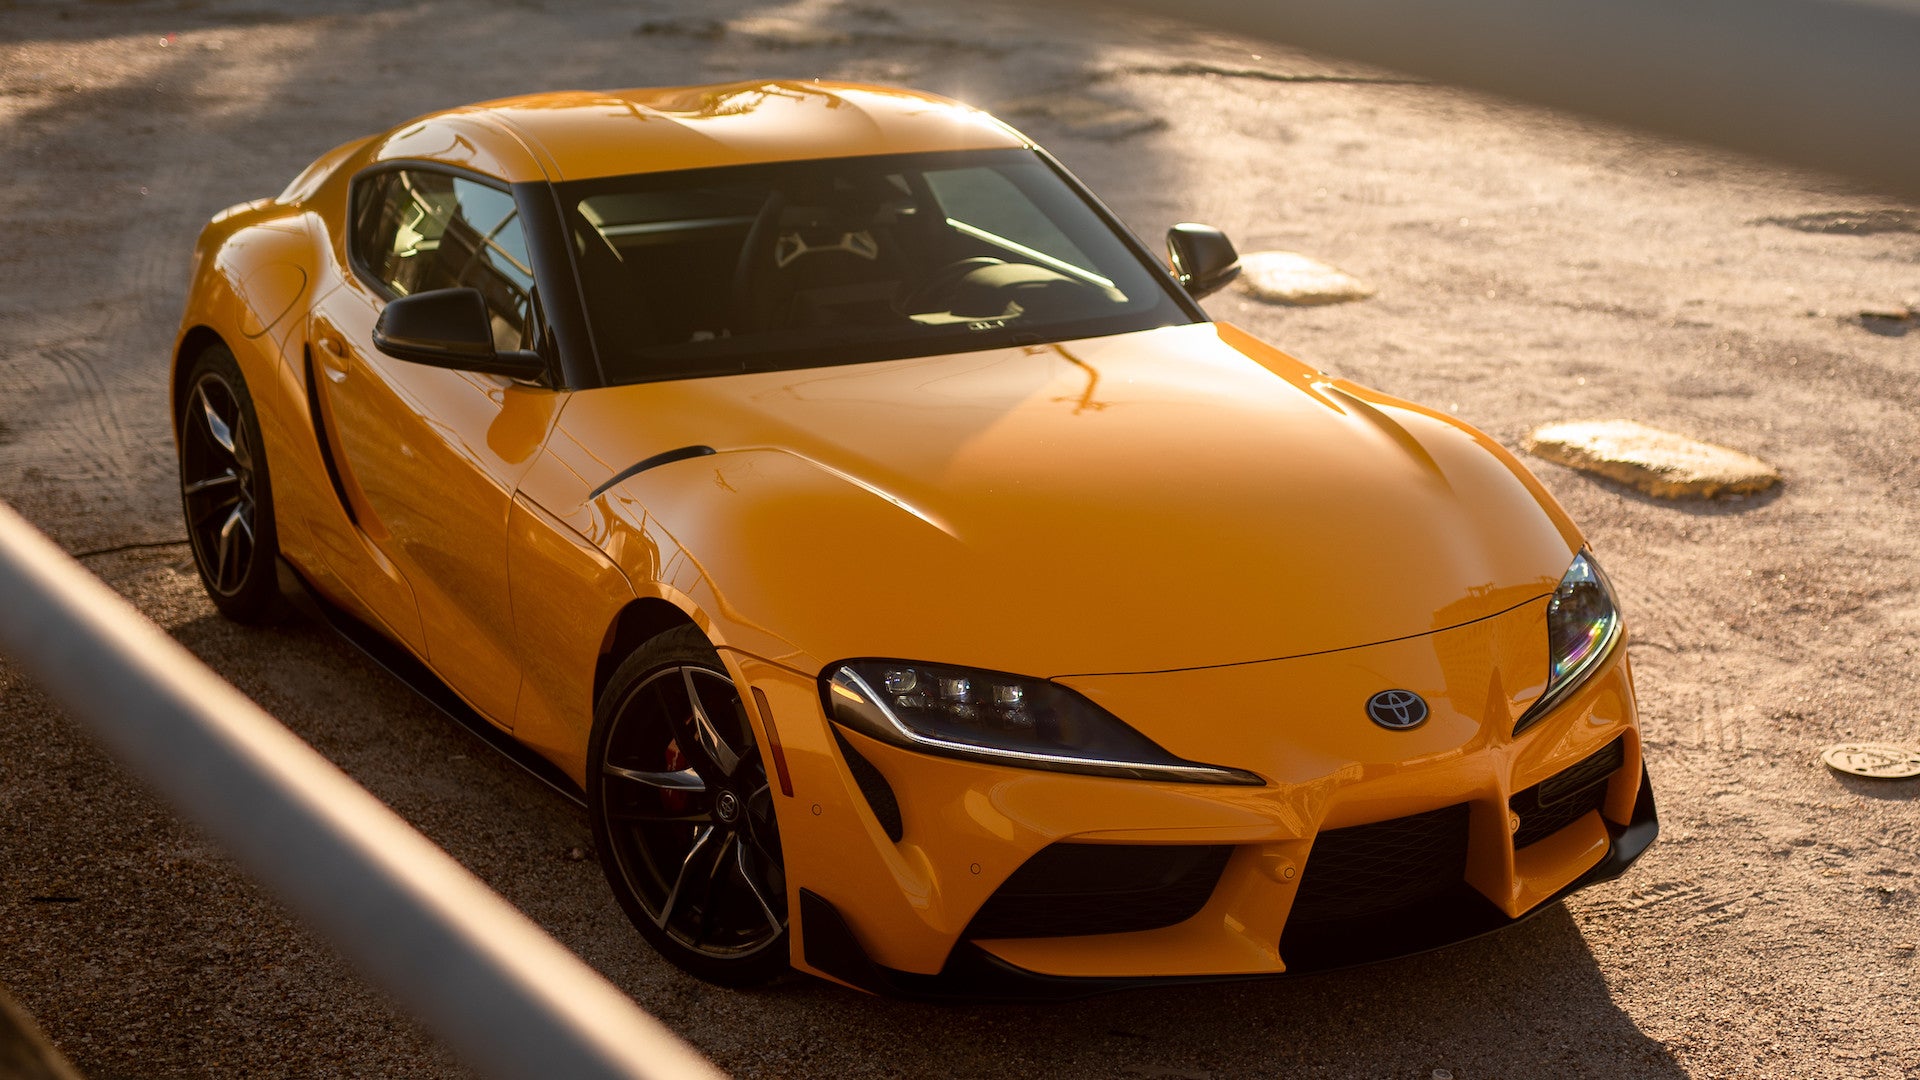 2023 Toyota Supra With A Six Speed Manual Will Debut April 28: Report